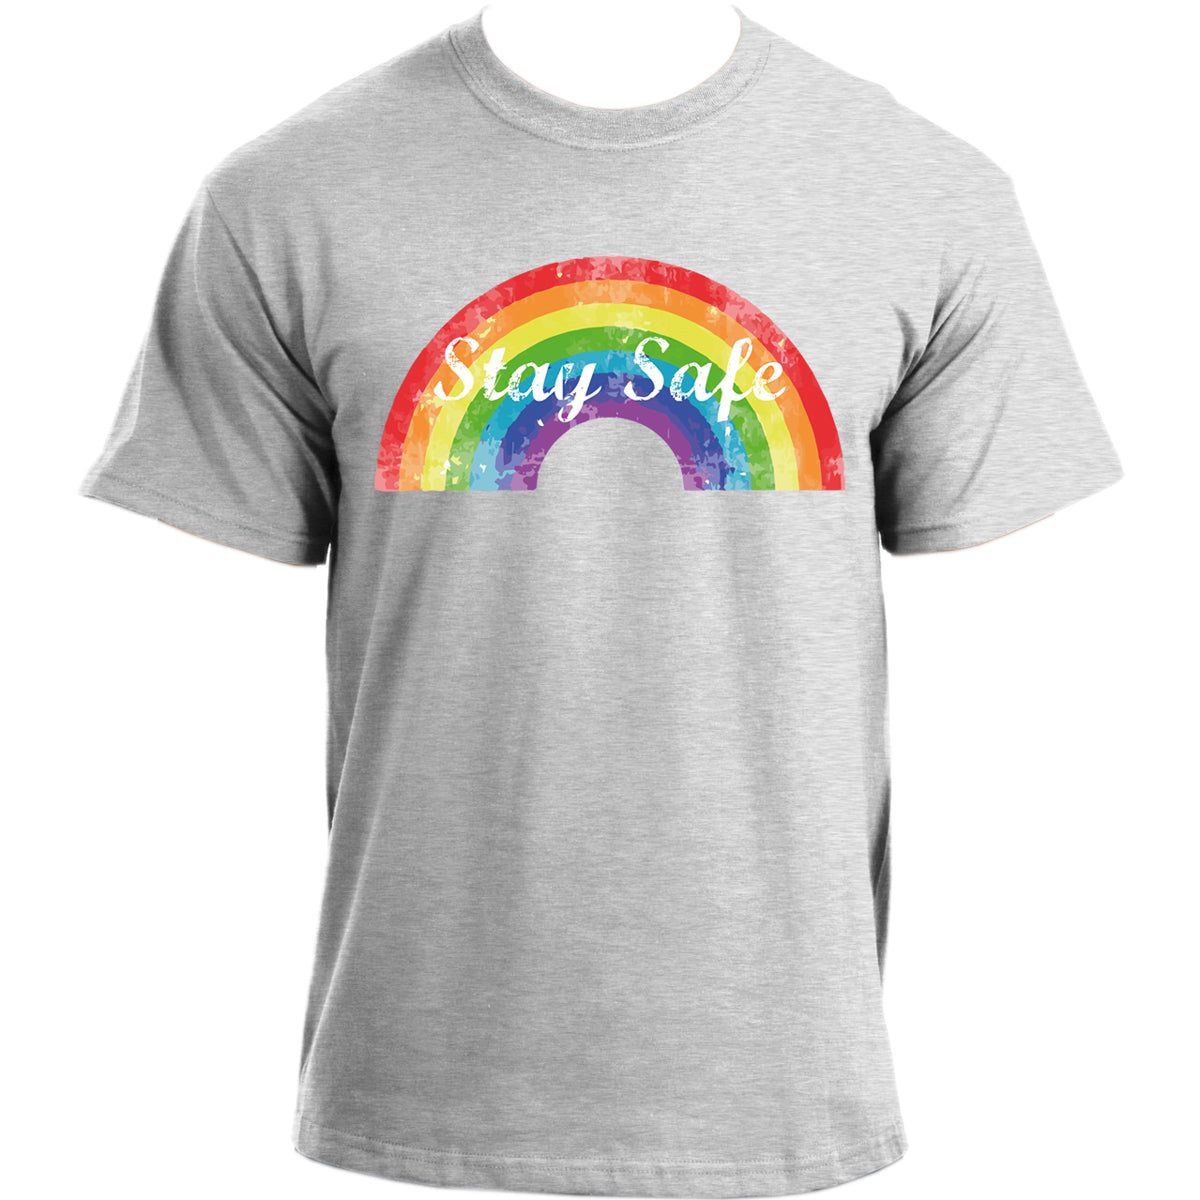 Rainbow I Thank You I 2020 Stay Home Social Distancing T-Shirt - Stay Safe Rainbow T Shirt